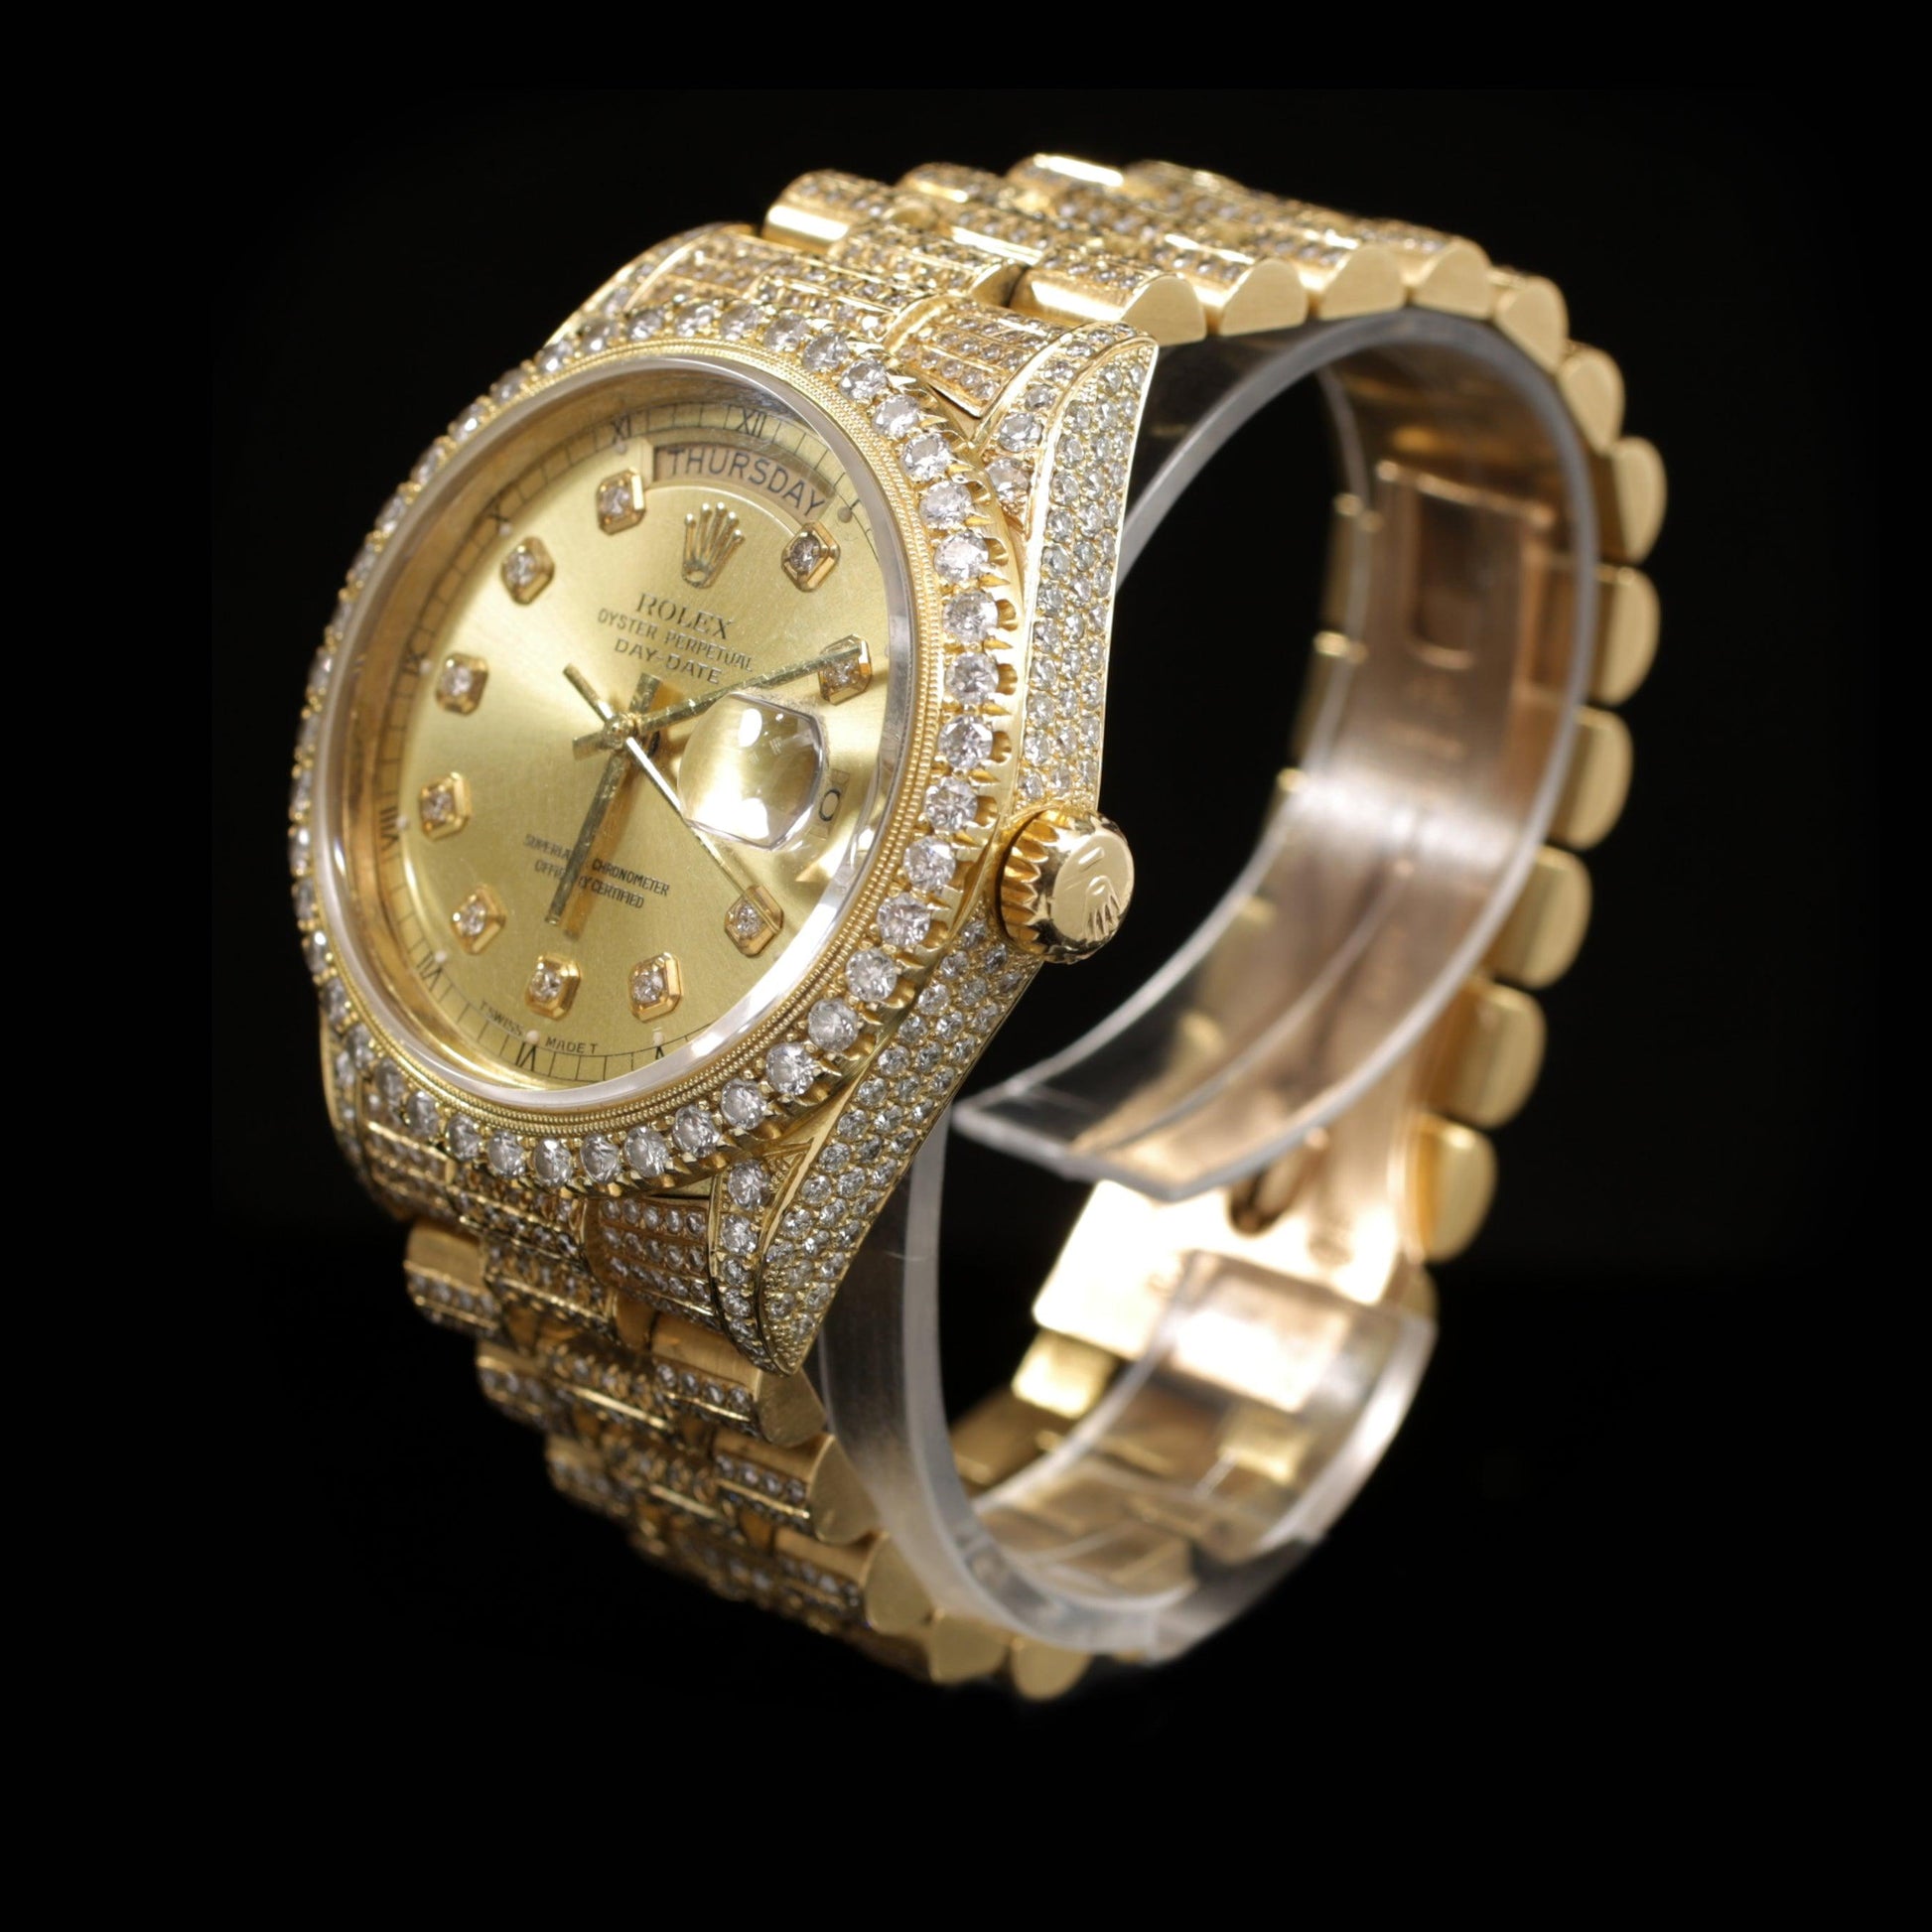 Watch - Rolex (7 Styles) - Photography and Web Design - Los Angeles, US based Shopify Experts Revo Designs